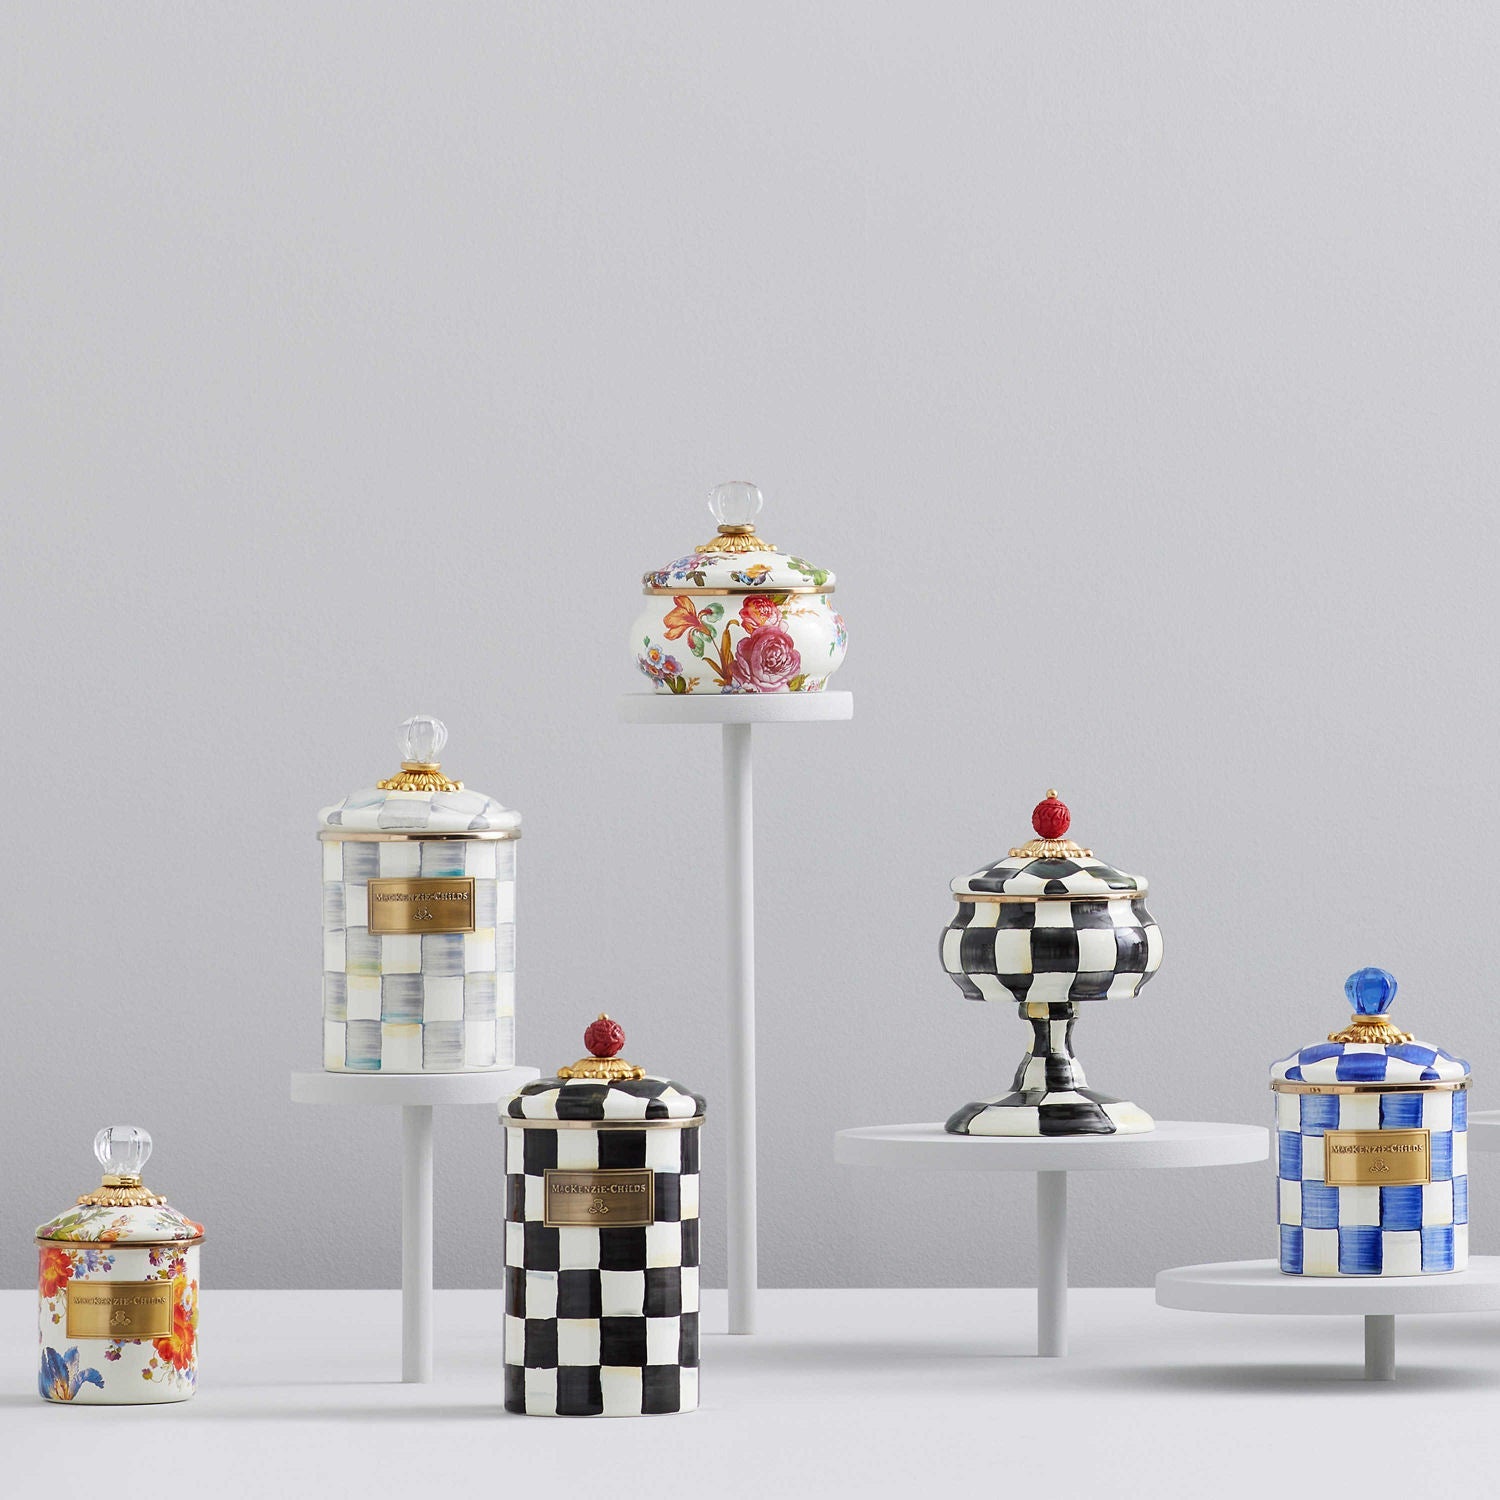 Royal Check Small Canister by Mackenzie Childs - |VESIMI Design|